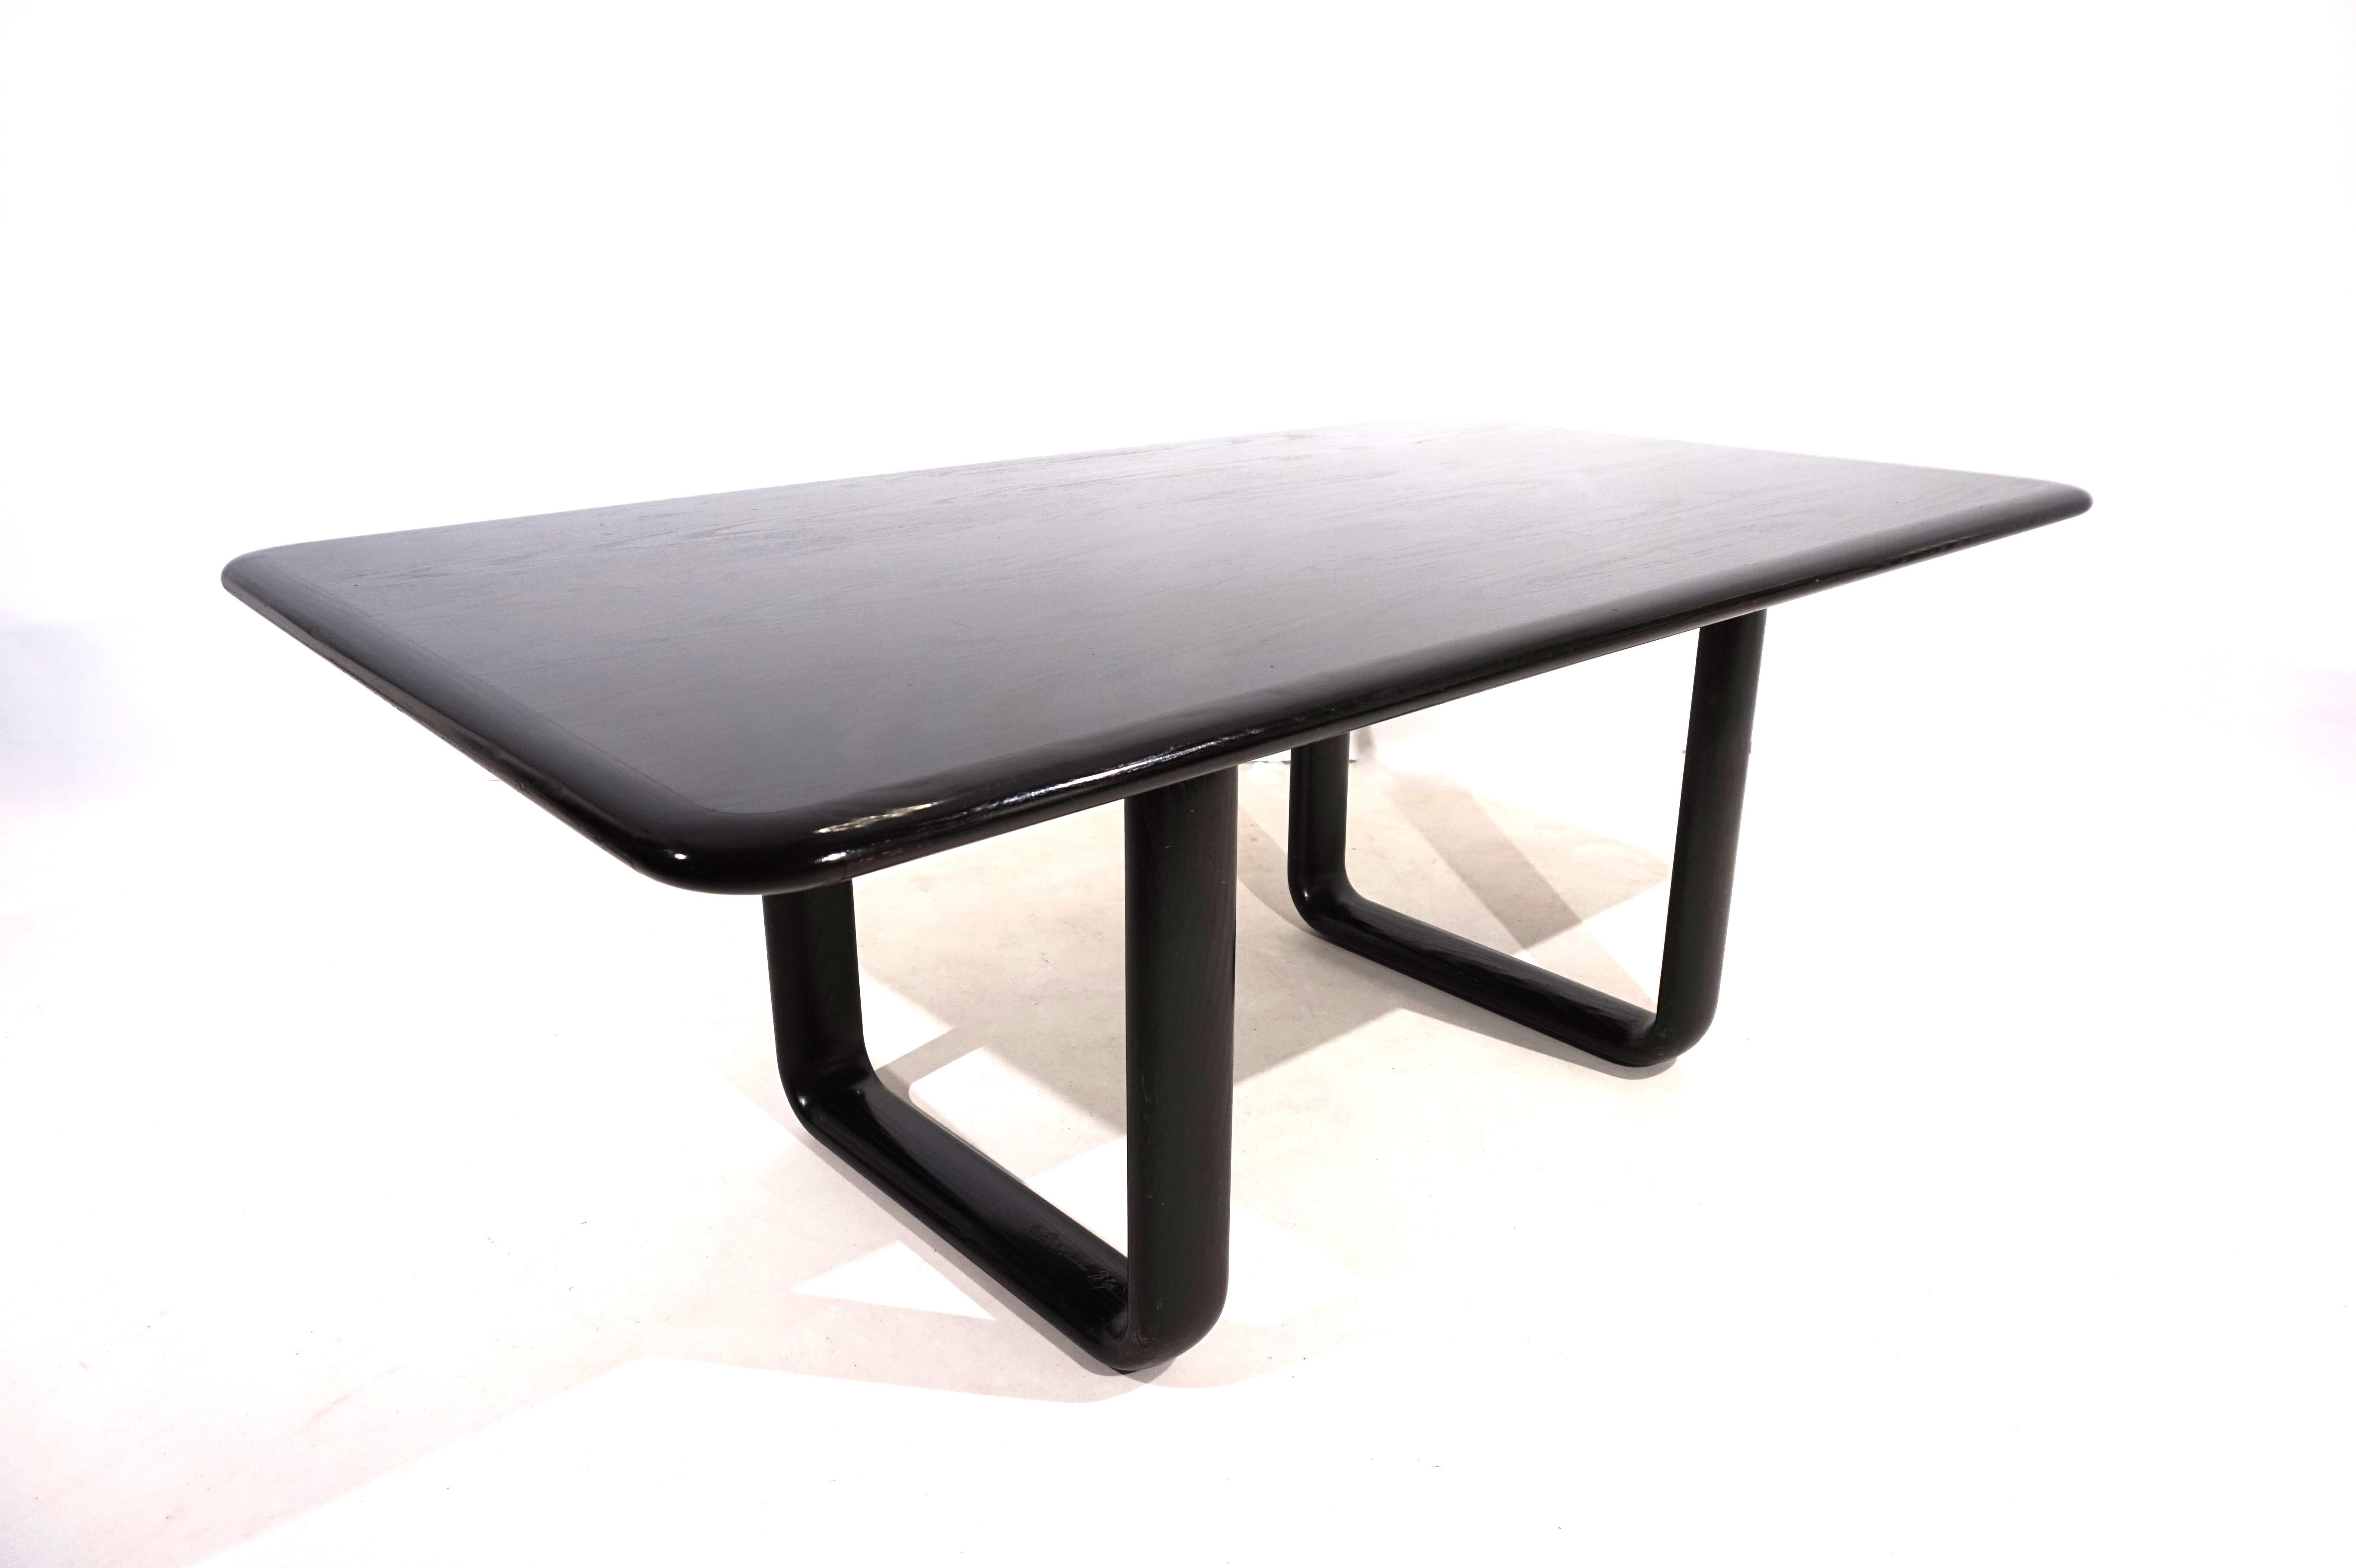 German Rosenthal Hombre dining table by Burkhard Vogtherr